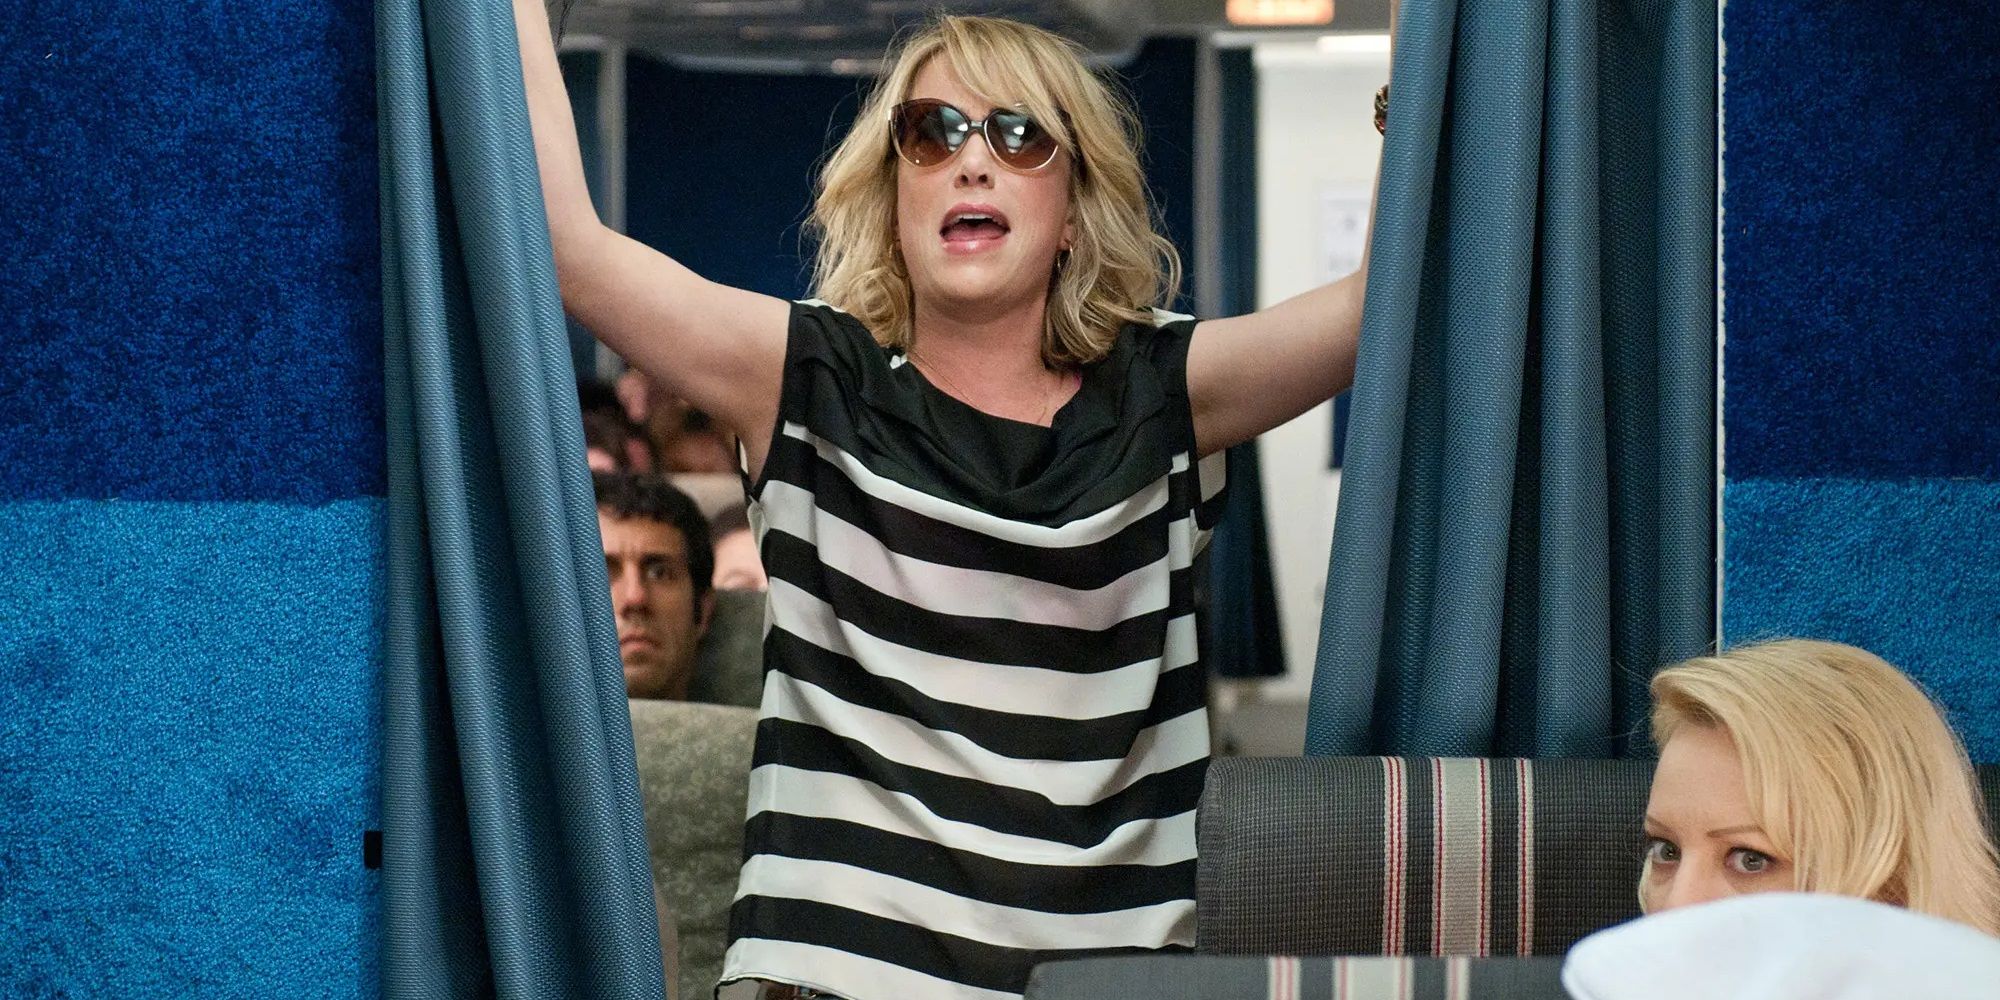 Annie on the plane in Bridesmaids